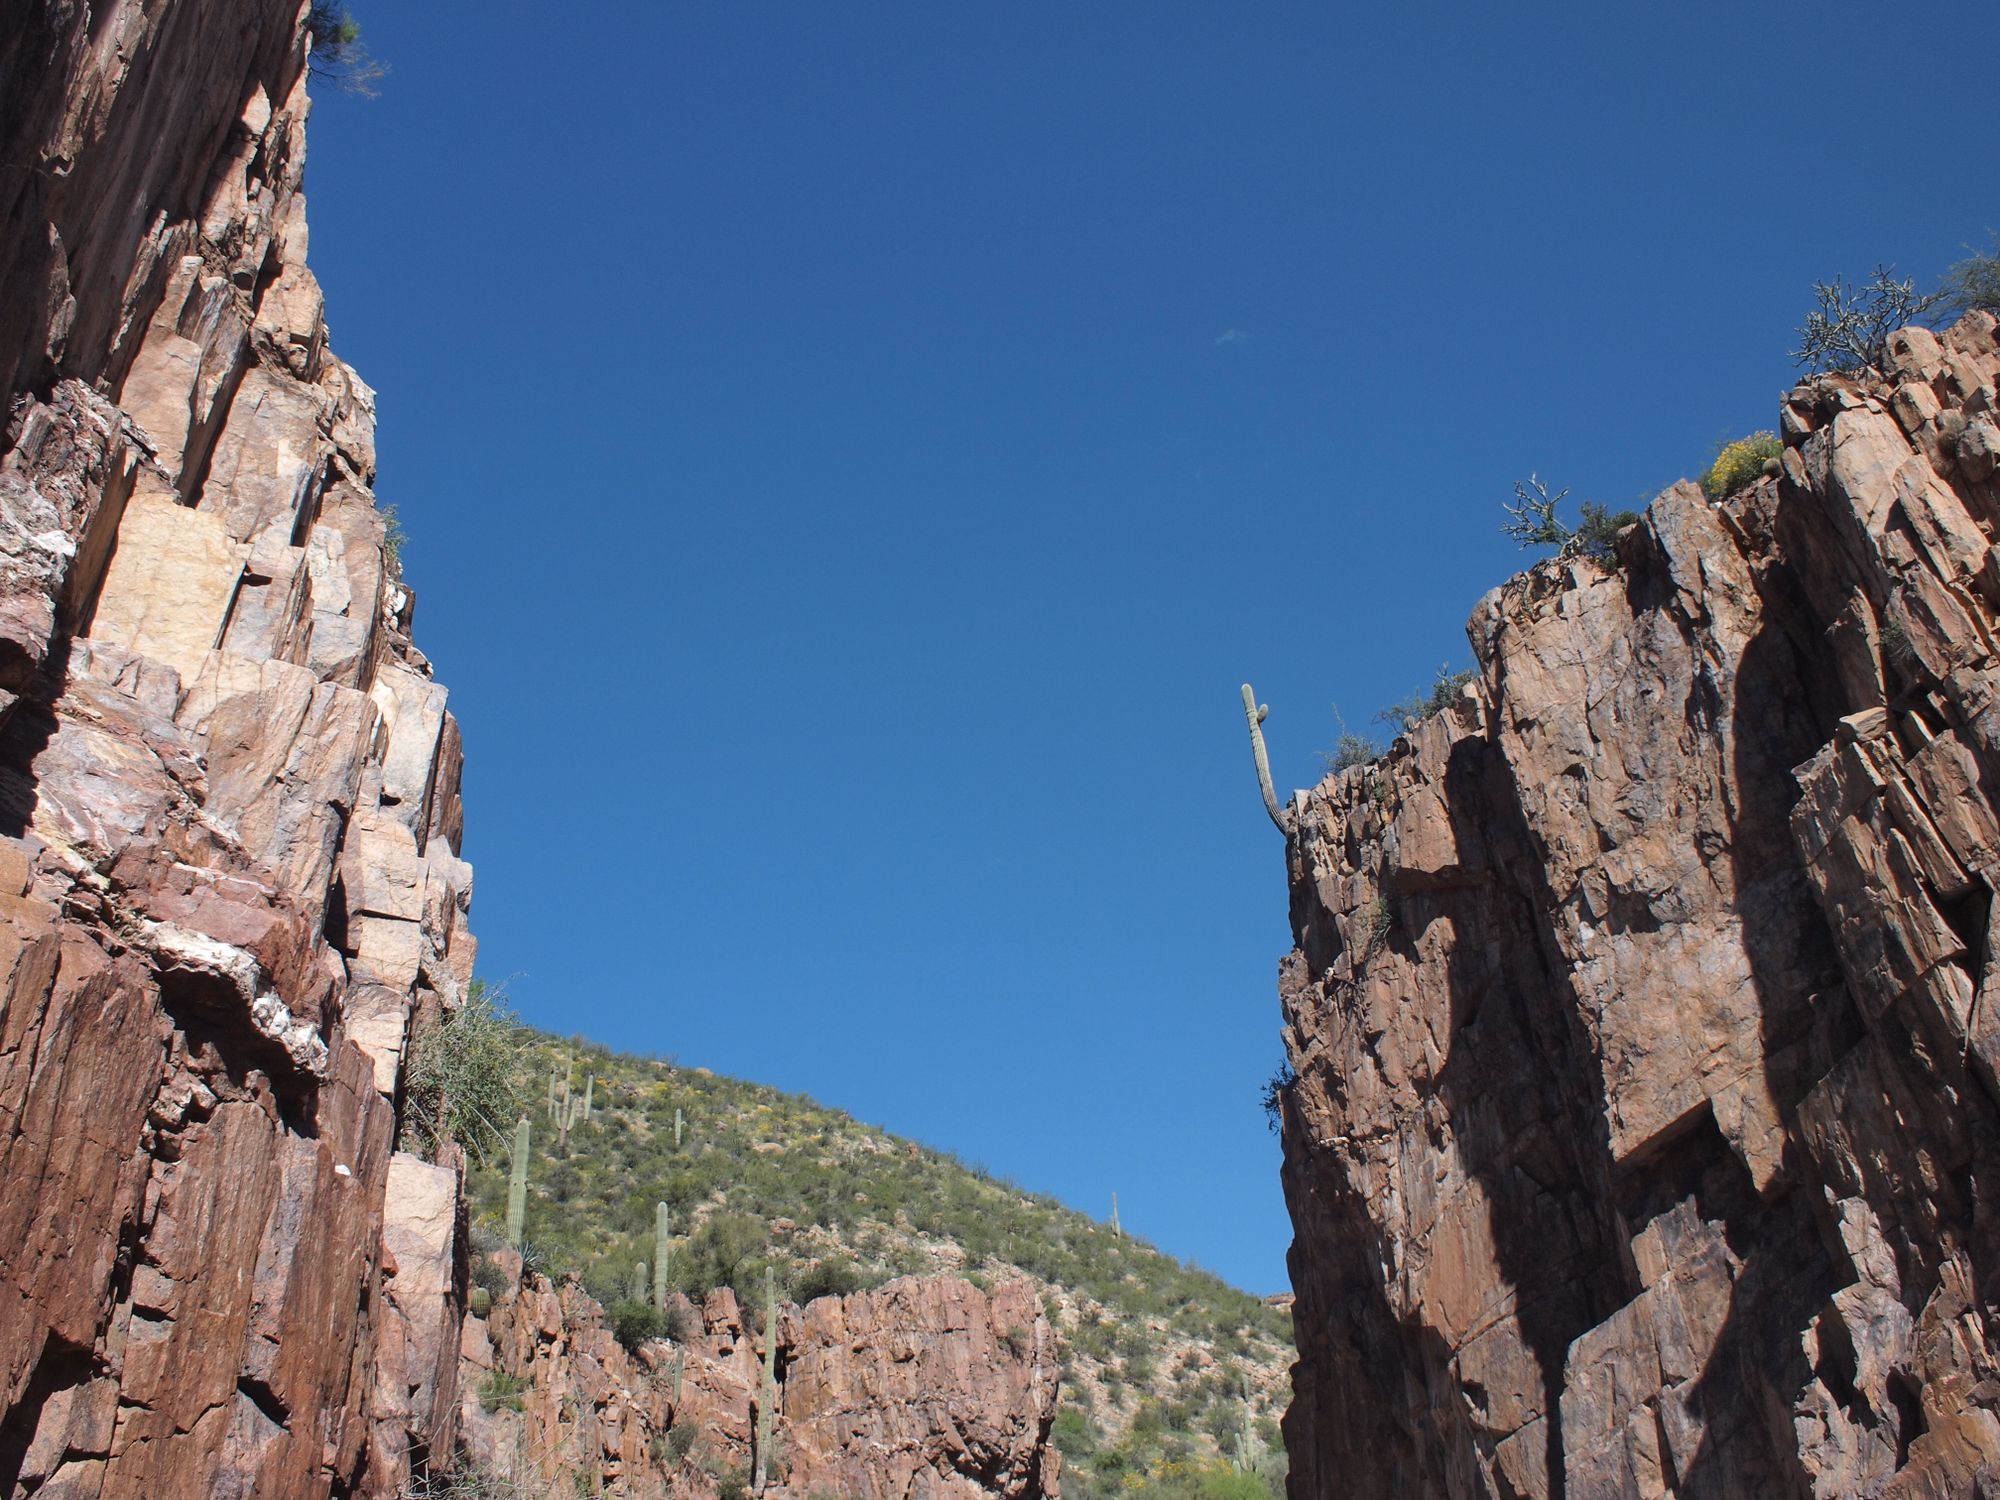 A huge saguaro cactus hangs improbably from a high cliff edge.  The photo is looking up the canyon walls towards a blue sky